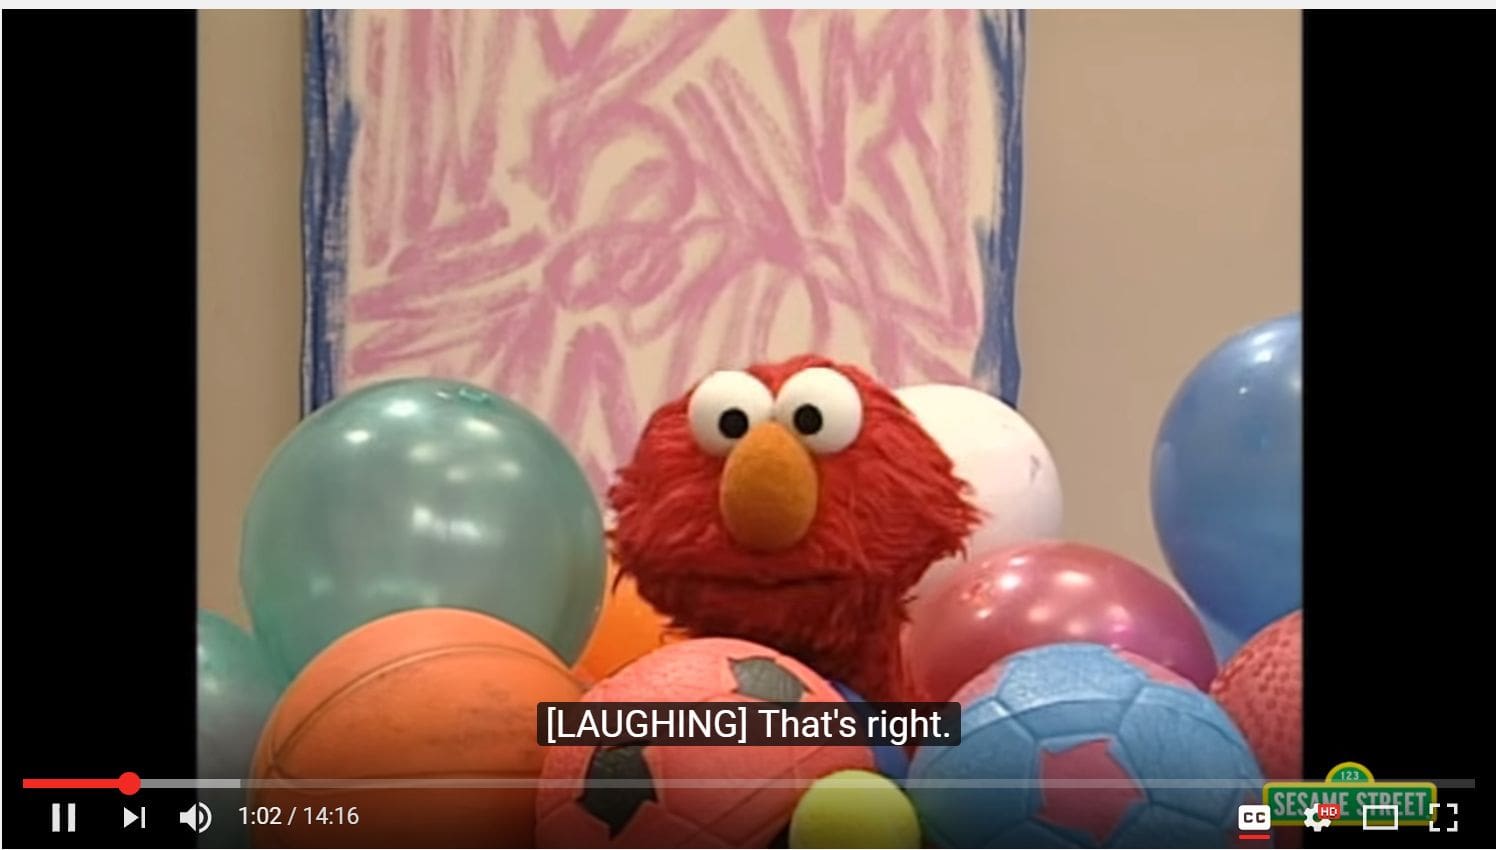 Sesame Street videos that have captions are helpful for those who cannot see them.